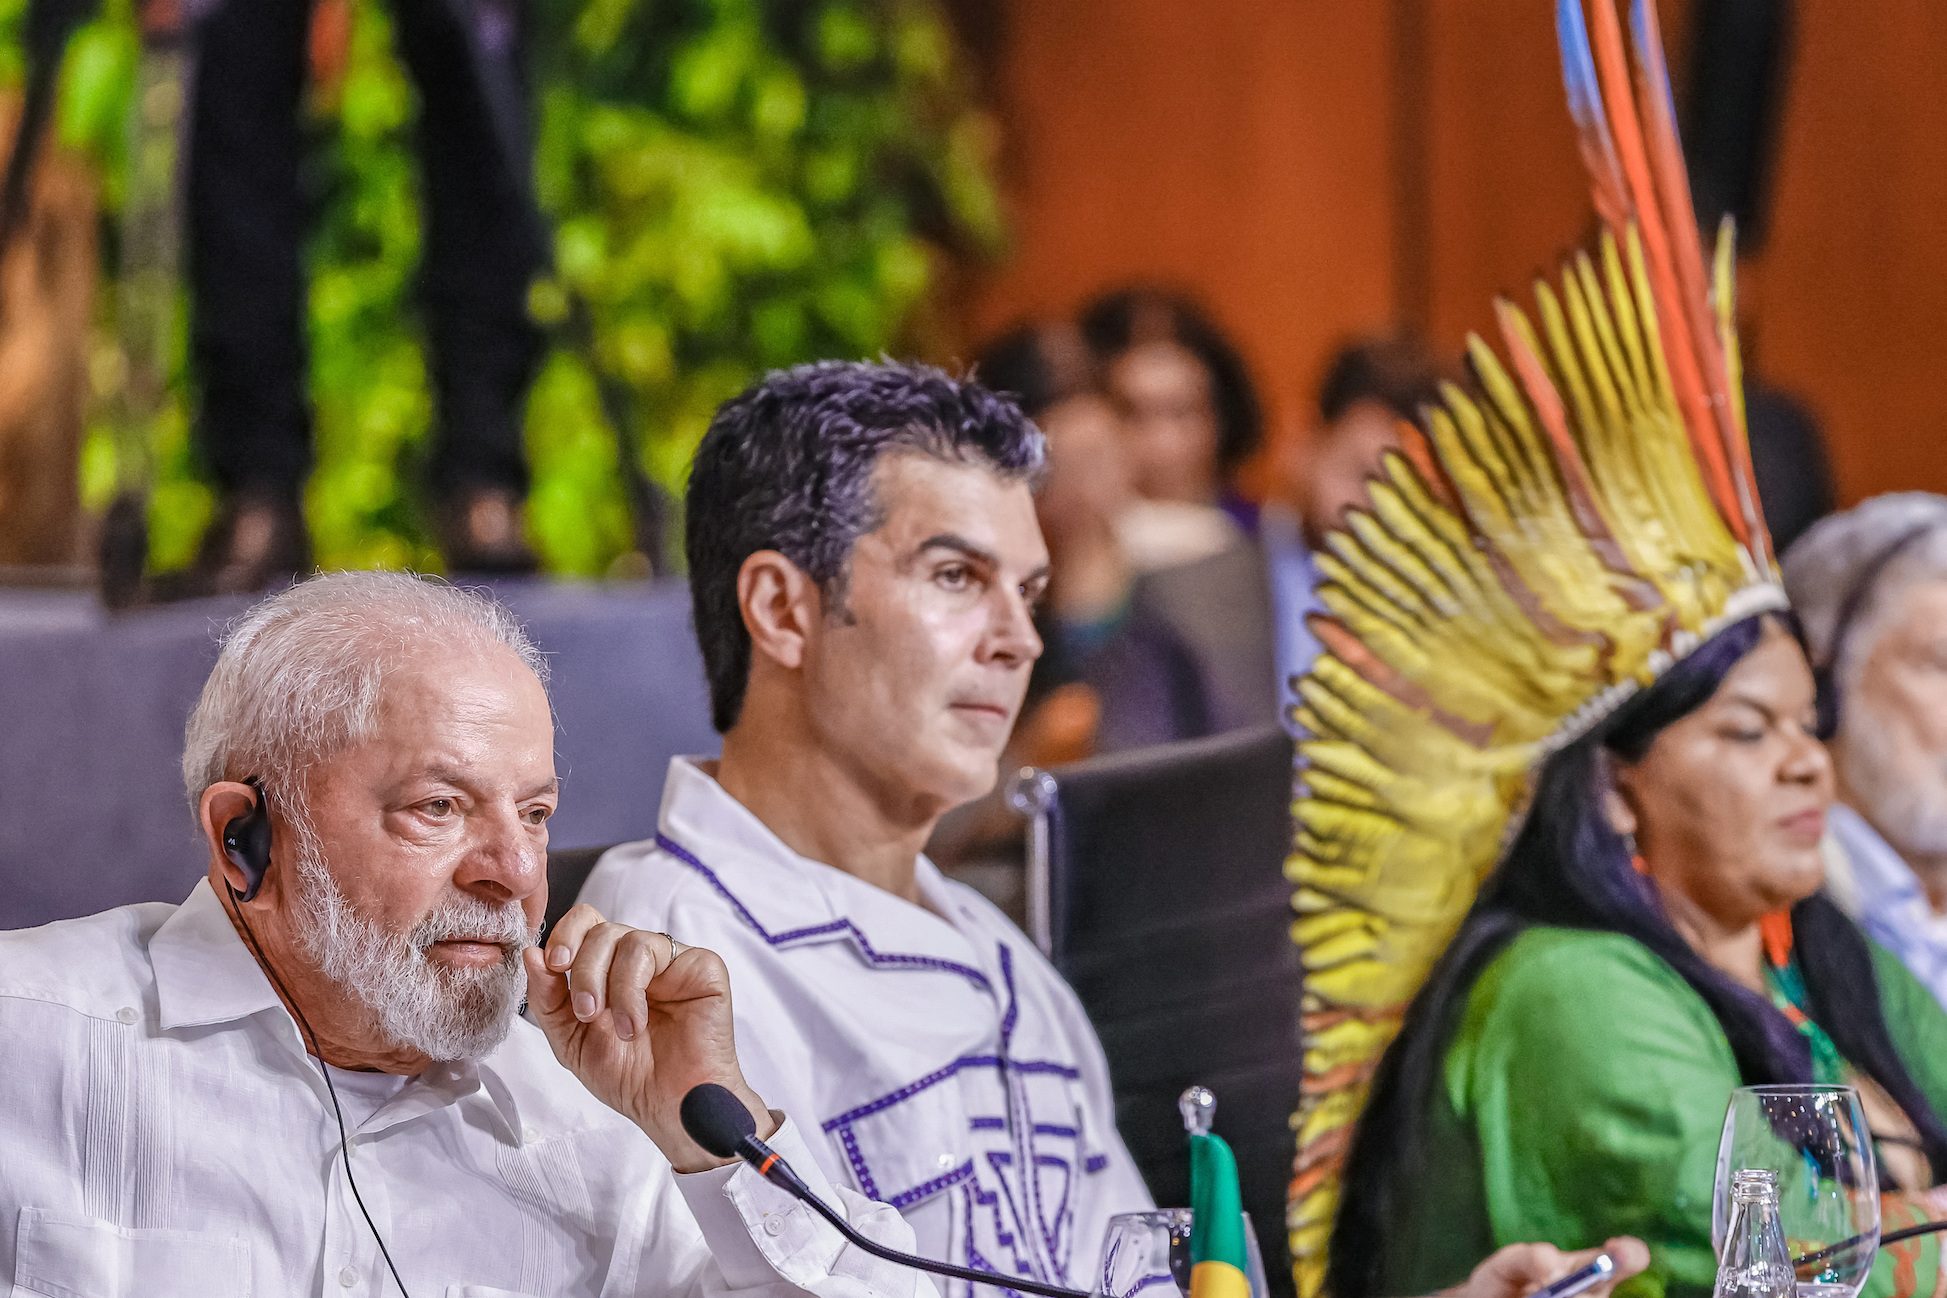 Region Leaders, Led by Lula, Sign a Rainforest Pact - The